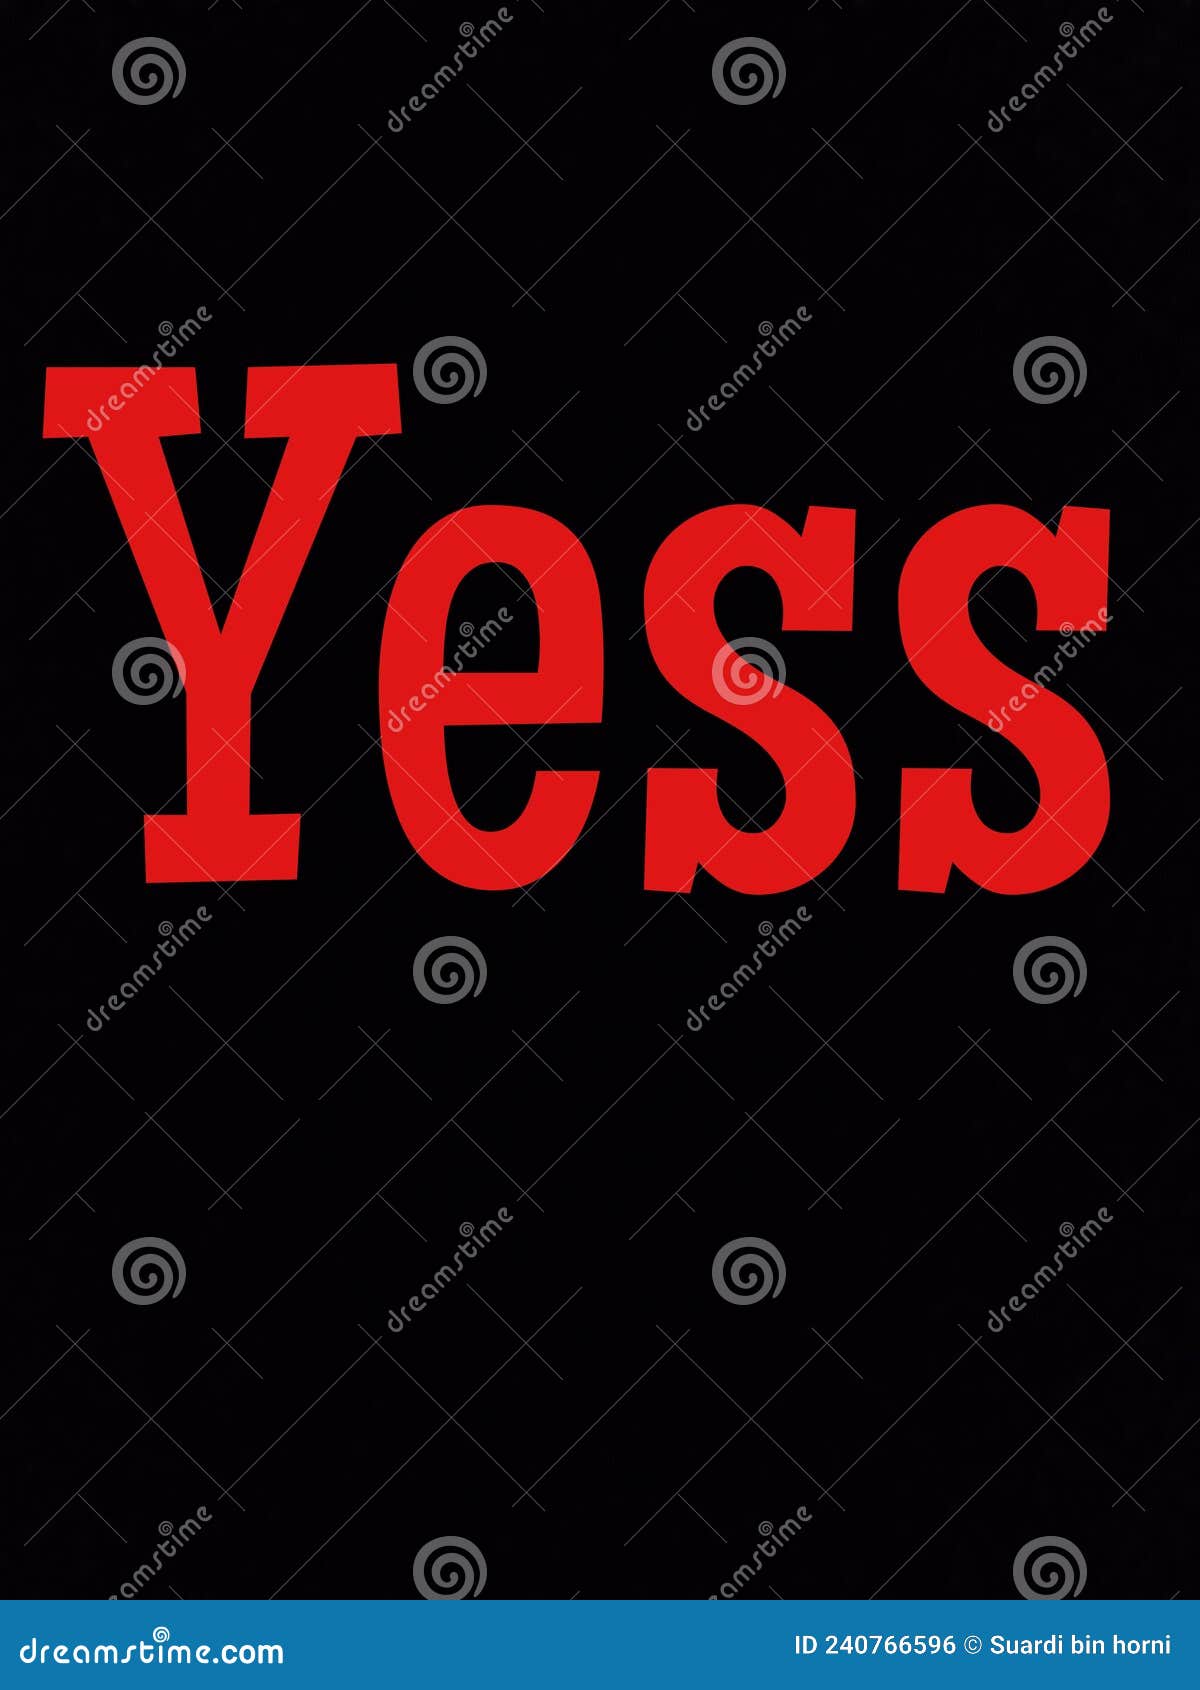 confidence expressional word "yess", red colored